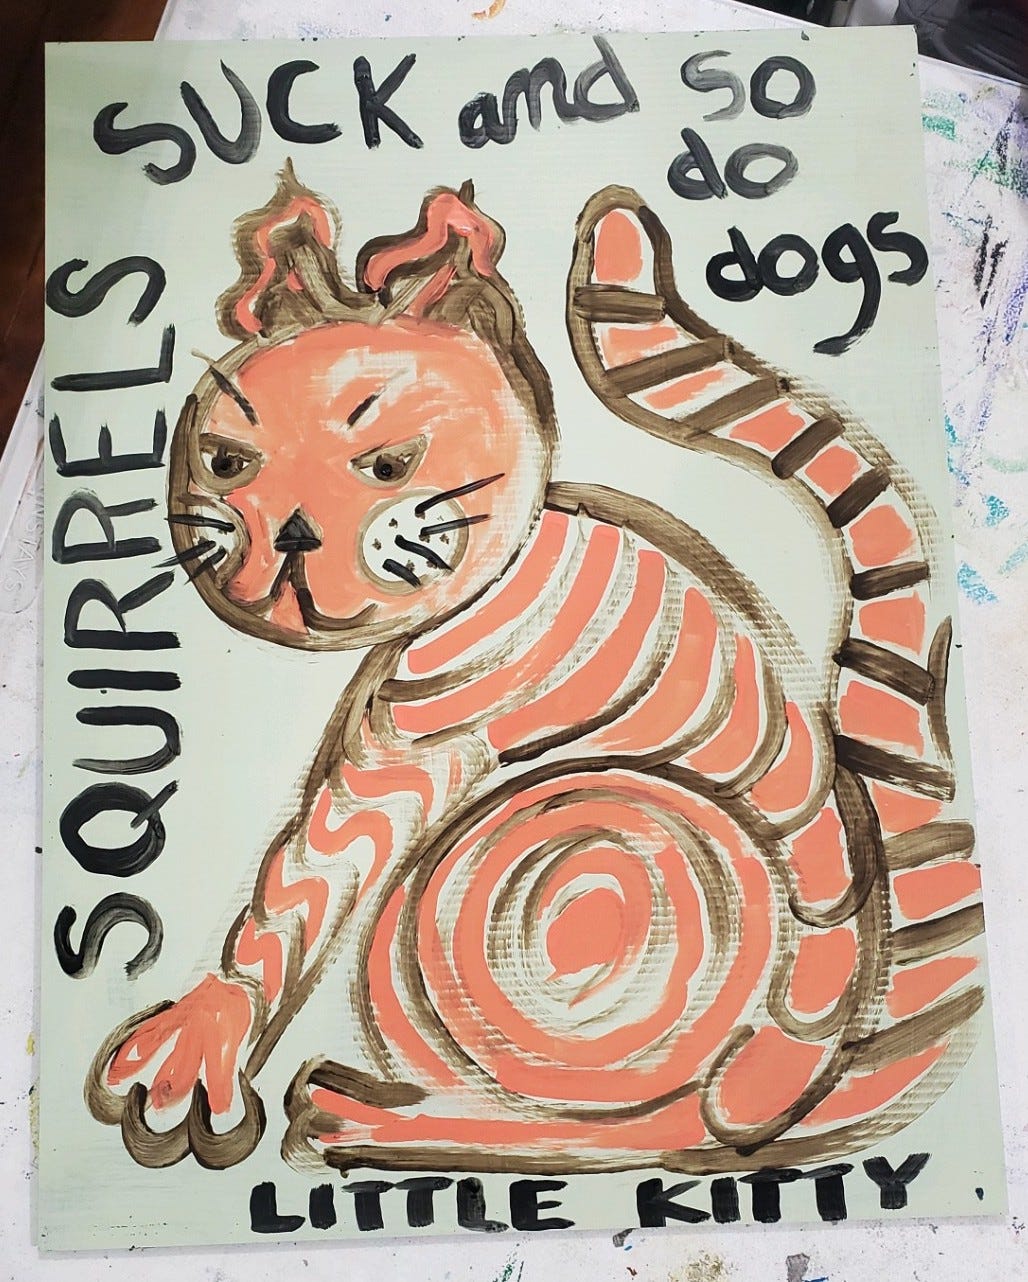 Painted sign of an orange striped cat that says "squirrels suck and so do dogs" with "little kitty" written at the bottom